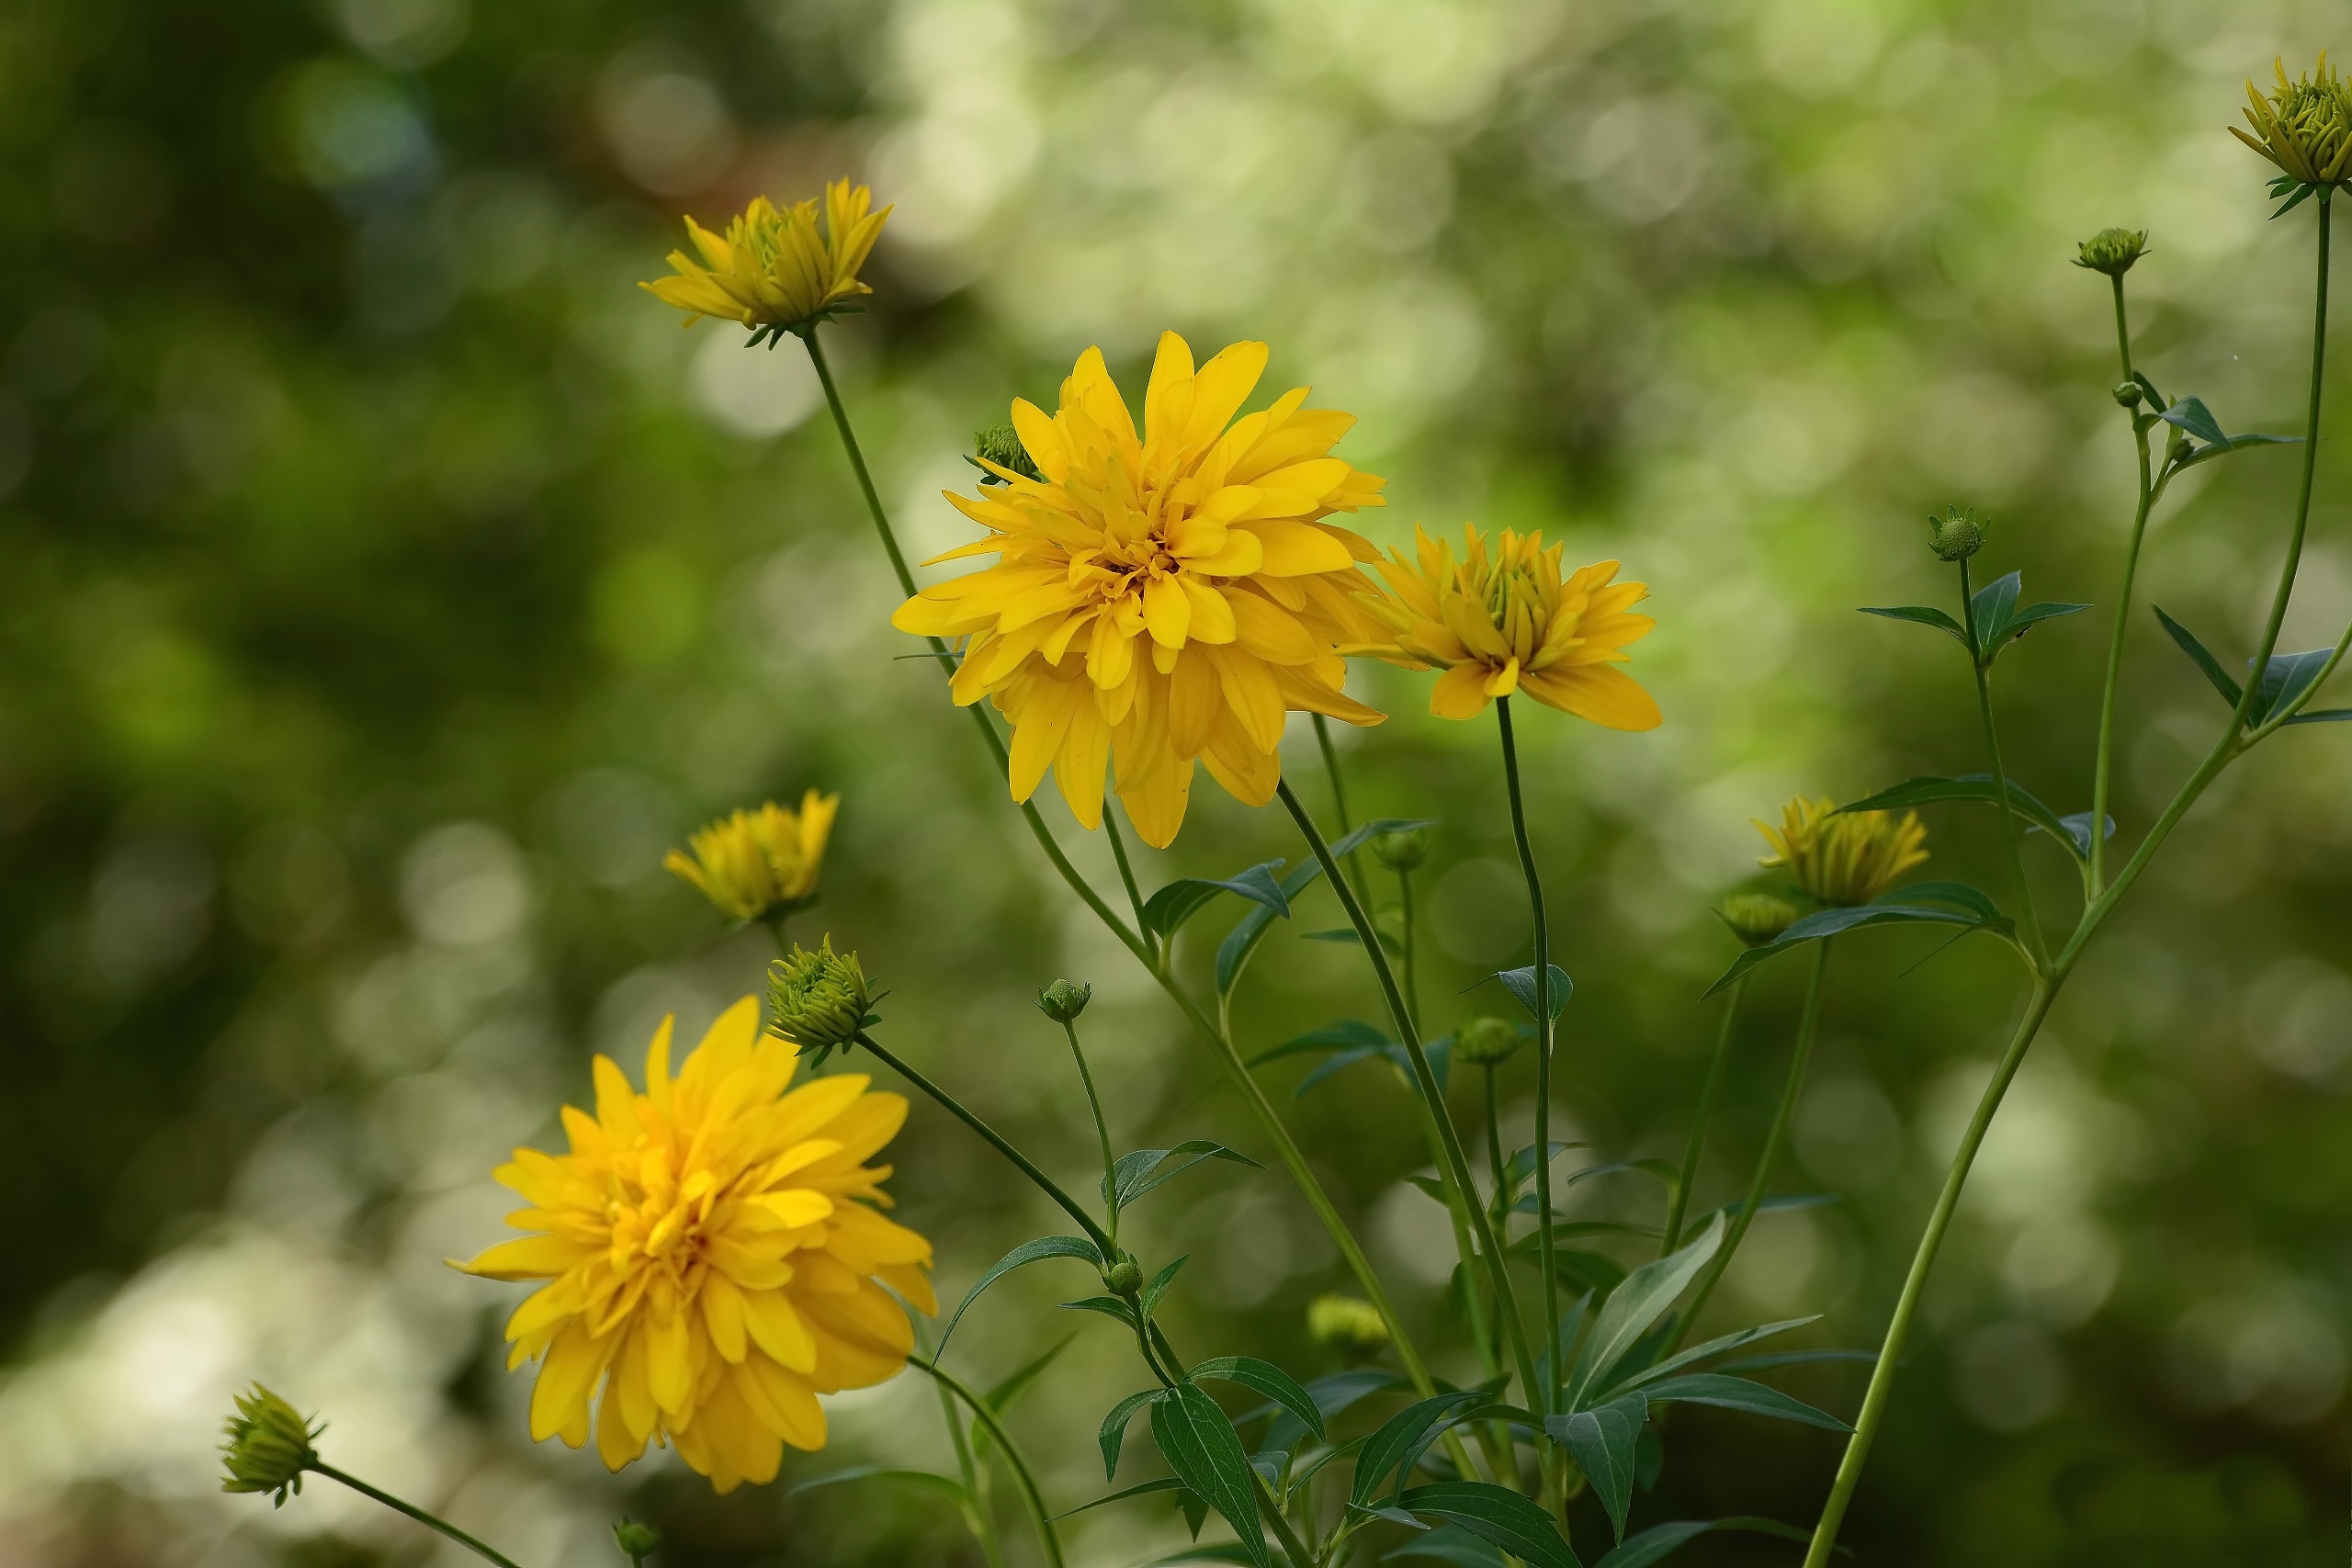 General 2560x1707 flowers plants yellow flowers outdoors